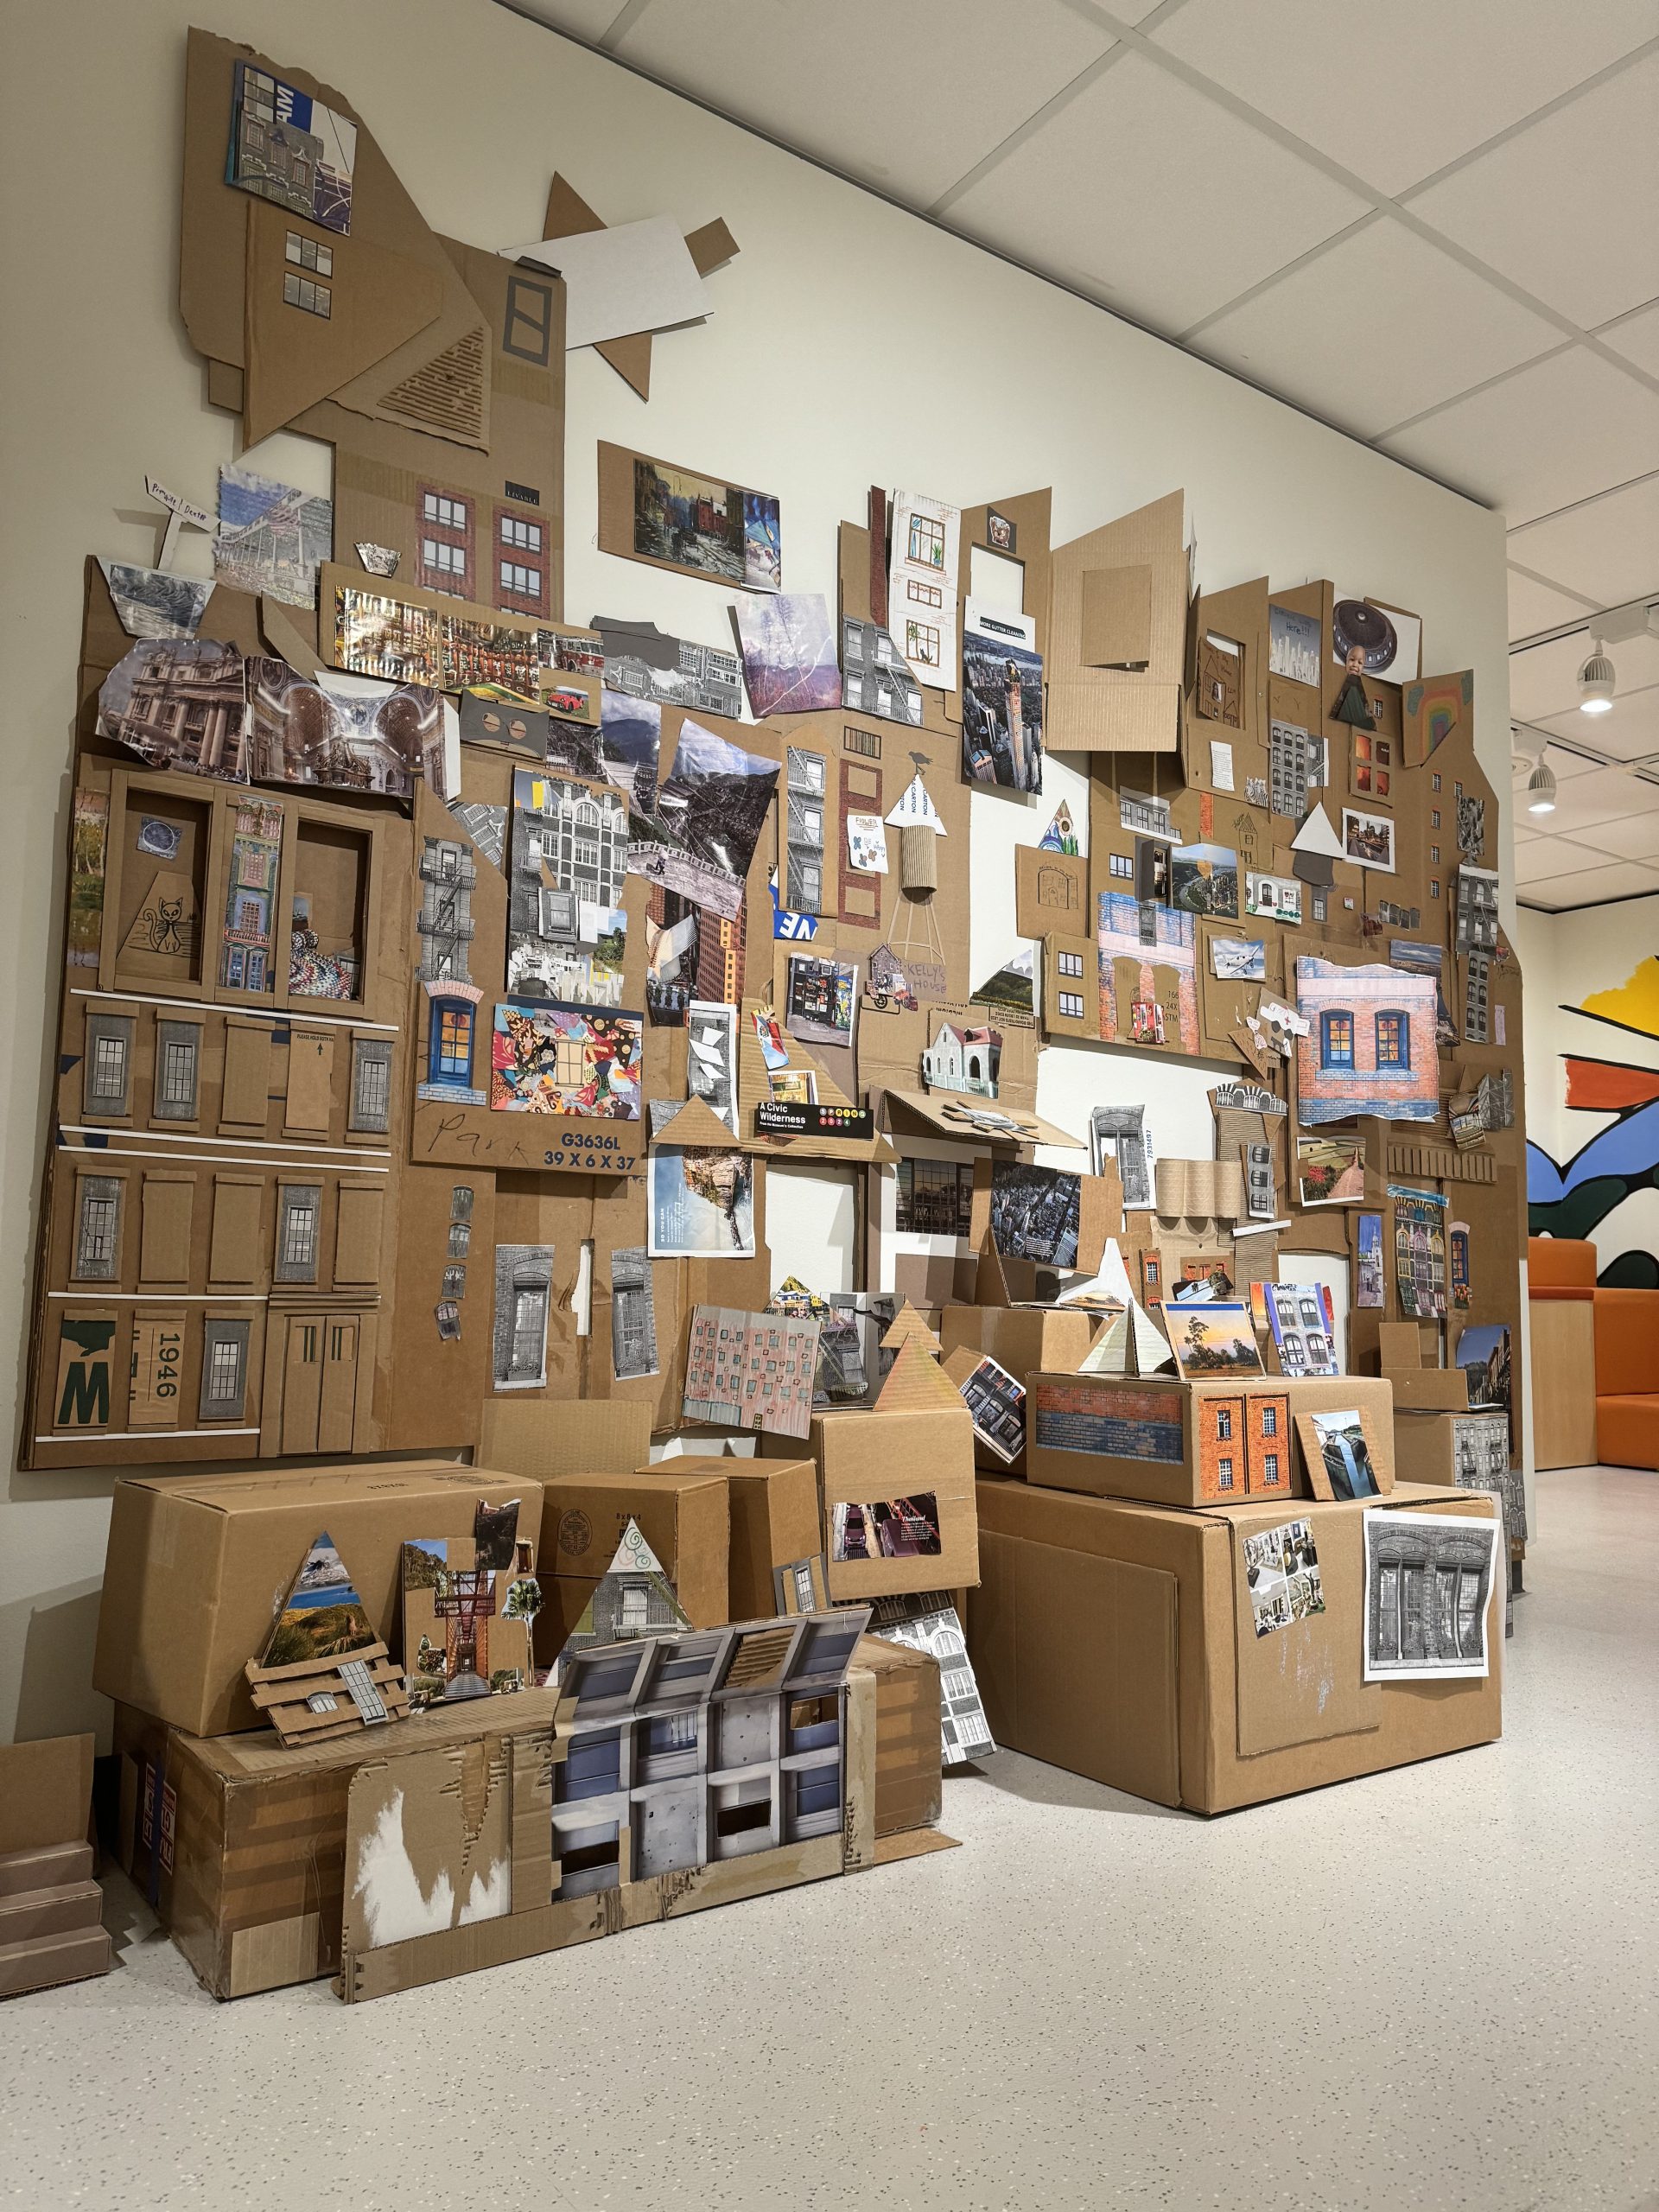 A cardboard cityscape project displayed in Art Park that visitors have contributed to.